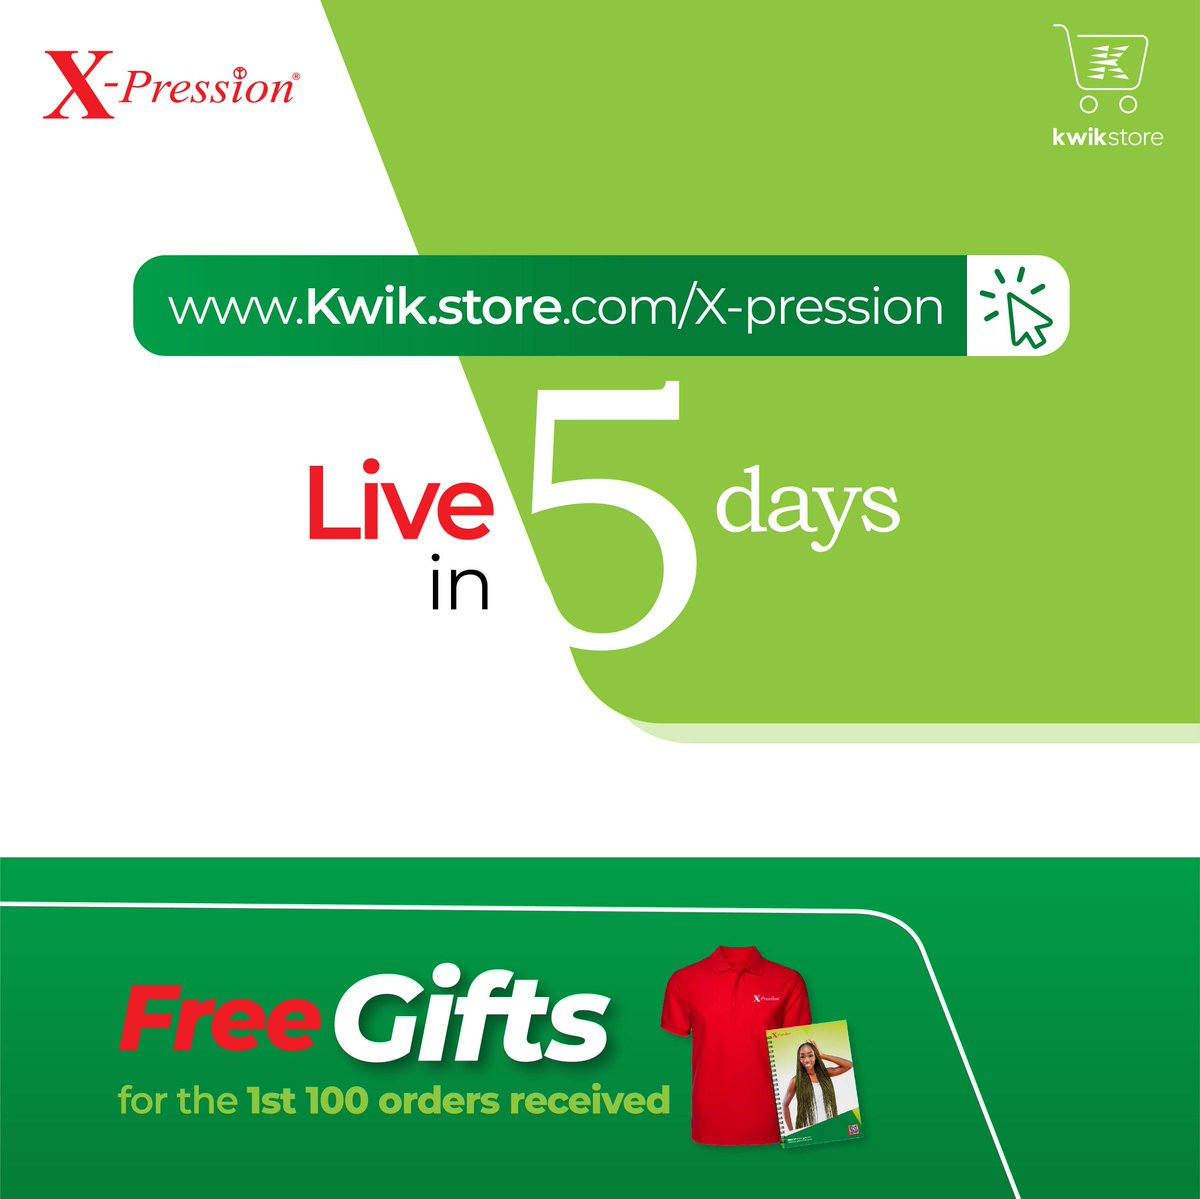 We go live in 5! Plenty of gifts to be won for the first 100 orders! Let’s get ready! 

@xp4you @kwikafrica 

#Xpression #Solpia #KwikDelivery #Kwikstore #Launch #Live